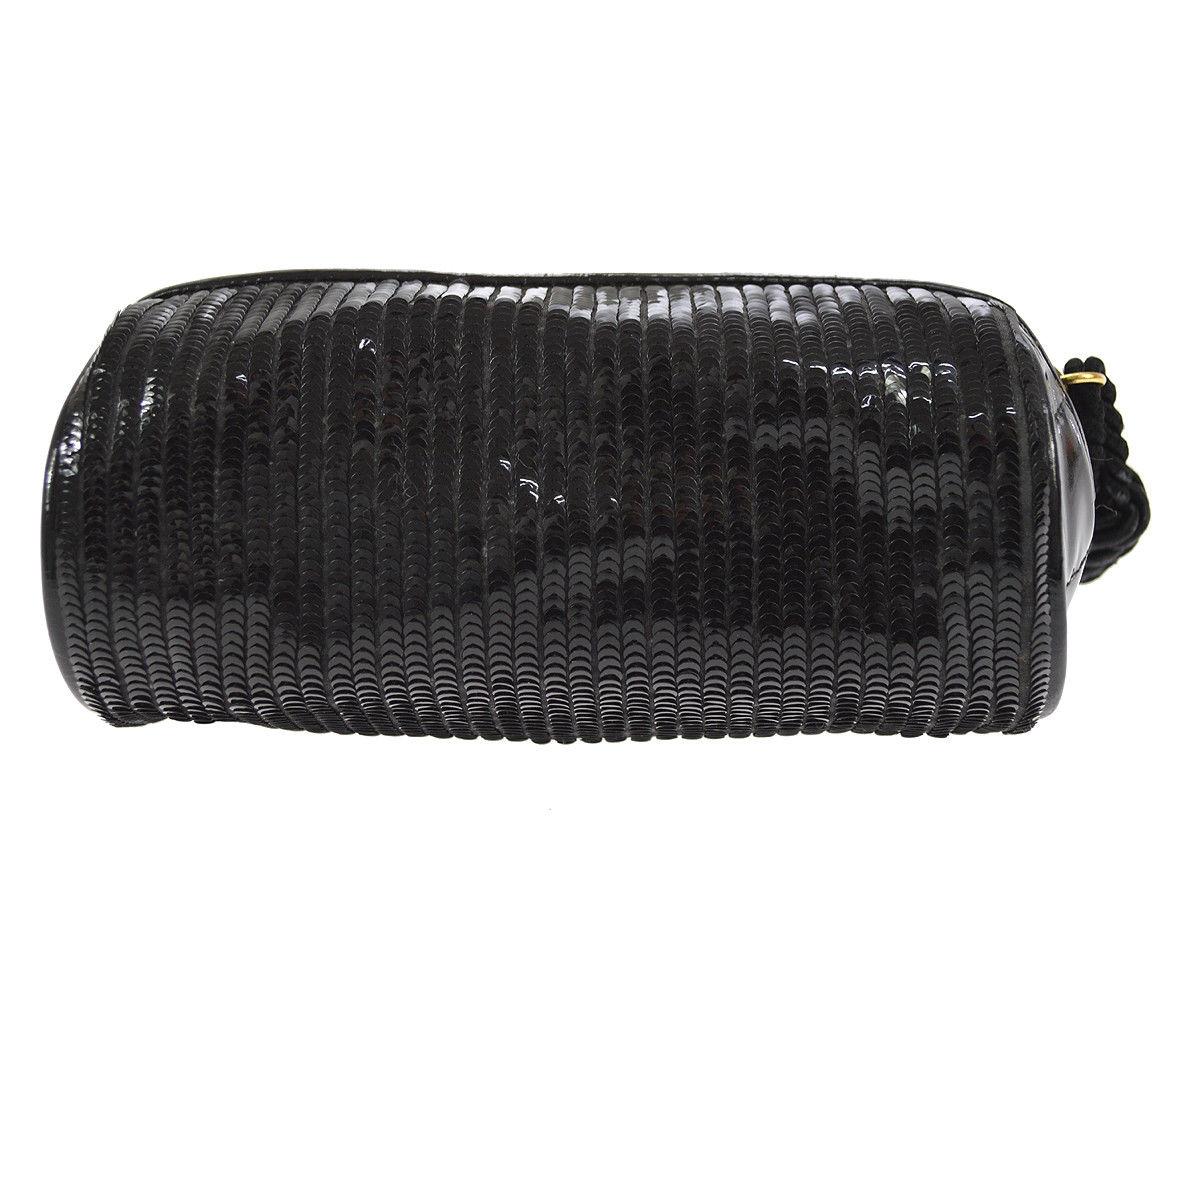 Chanel Black Patent Leather Sequin Bead Mini Small Baguette Clutch Evening Bag 1